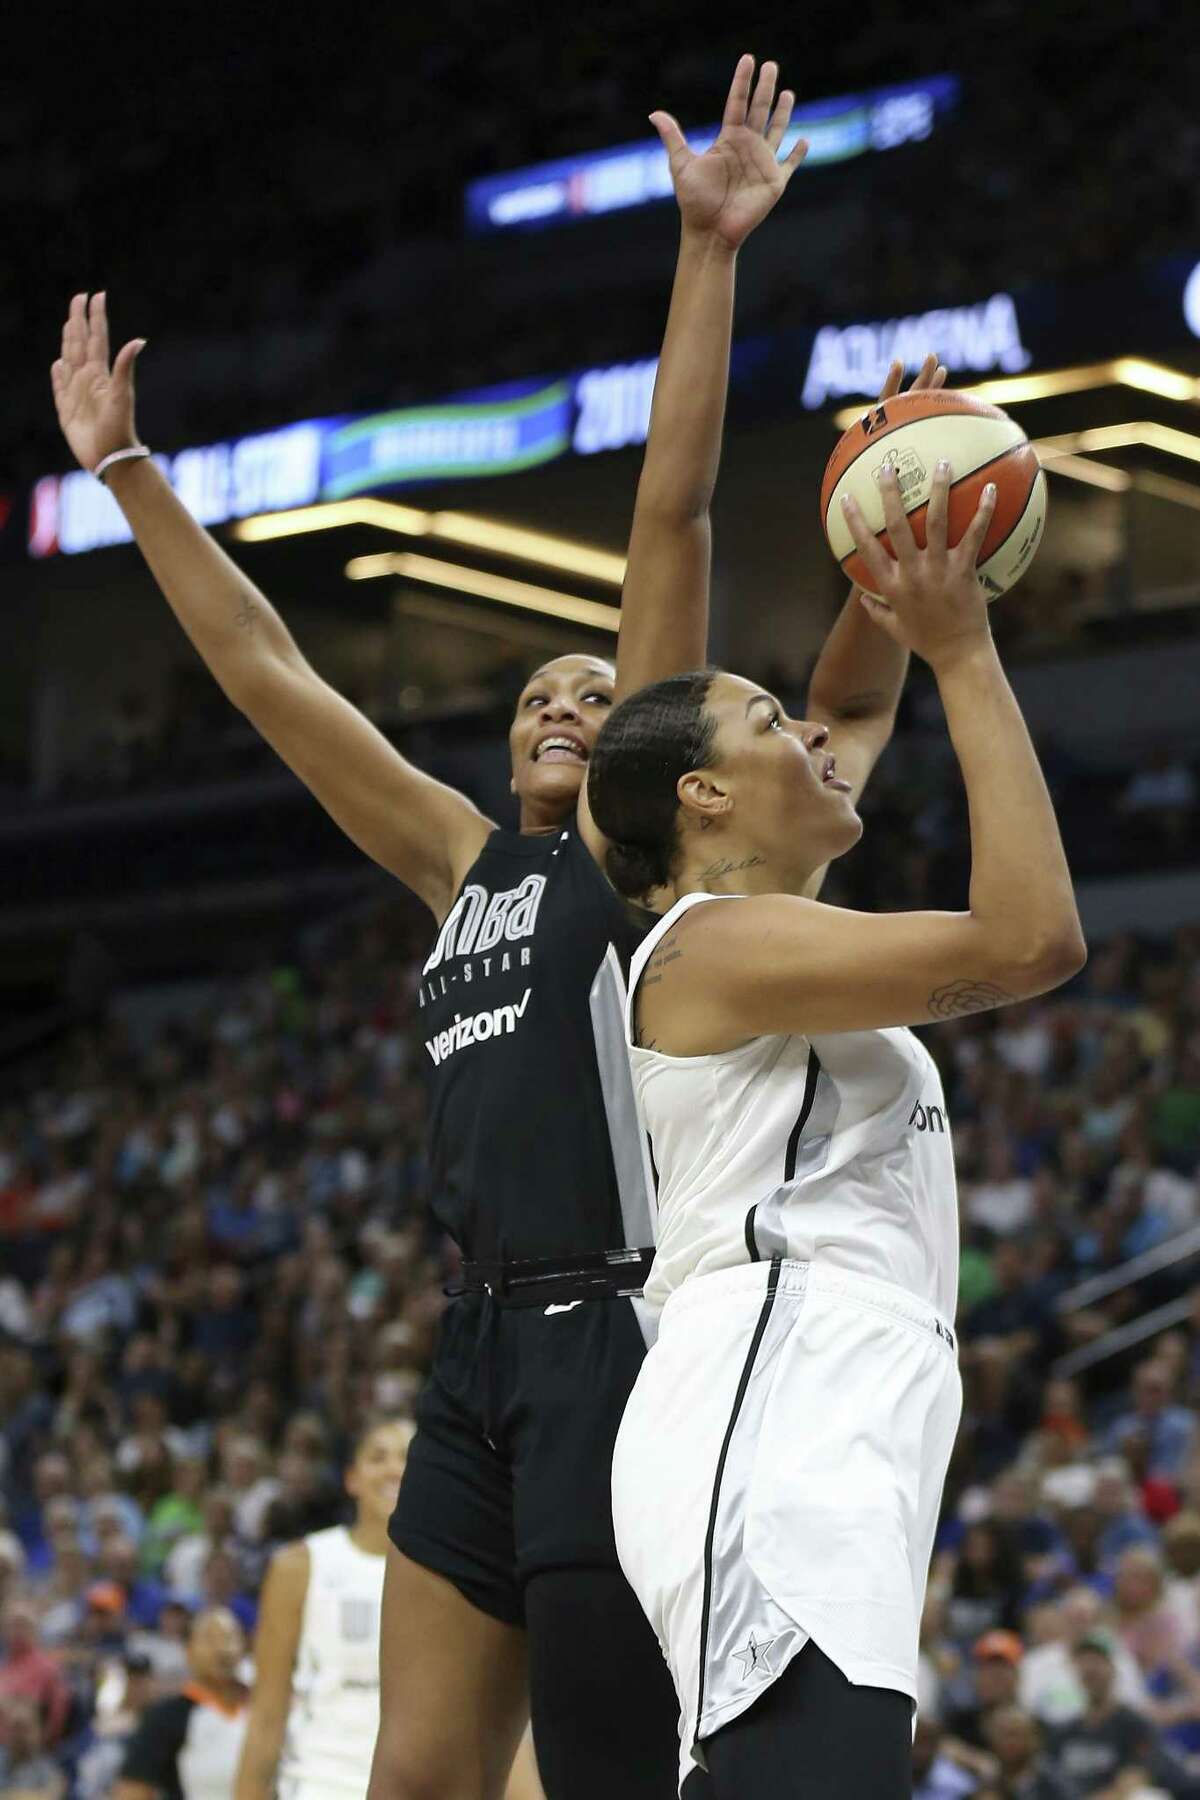 Team Candace Parker's Liz Cambage, right, shoots the ball against Team Delle Donne's A'ja Wilson, left, in the first half of the WNBA All-Star basketball game Saturday, July 28, 2018 in Minneapolis. (AP Photo/Stacy Bengs)